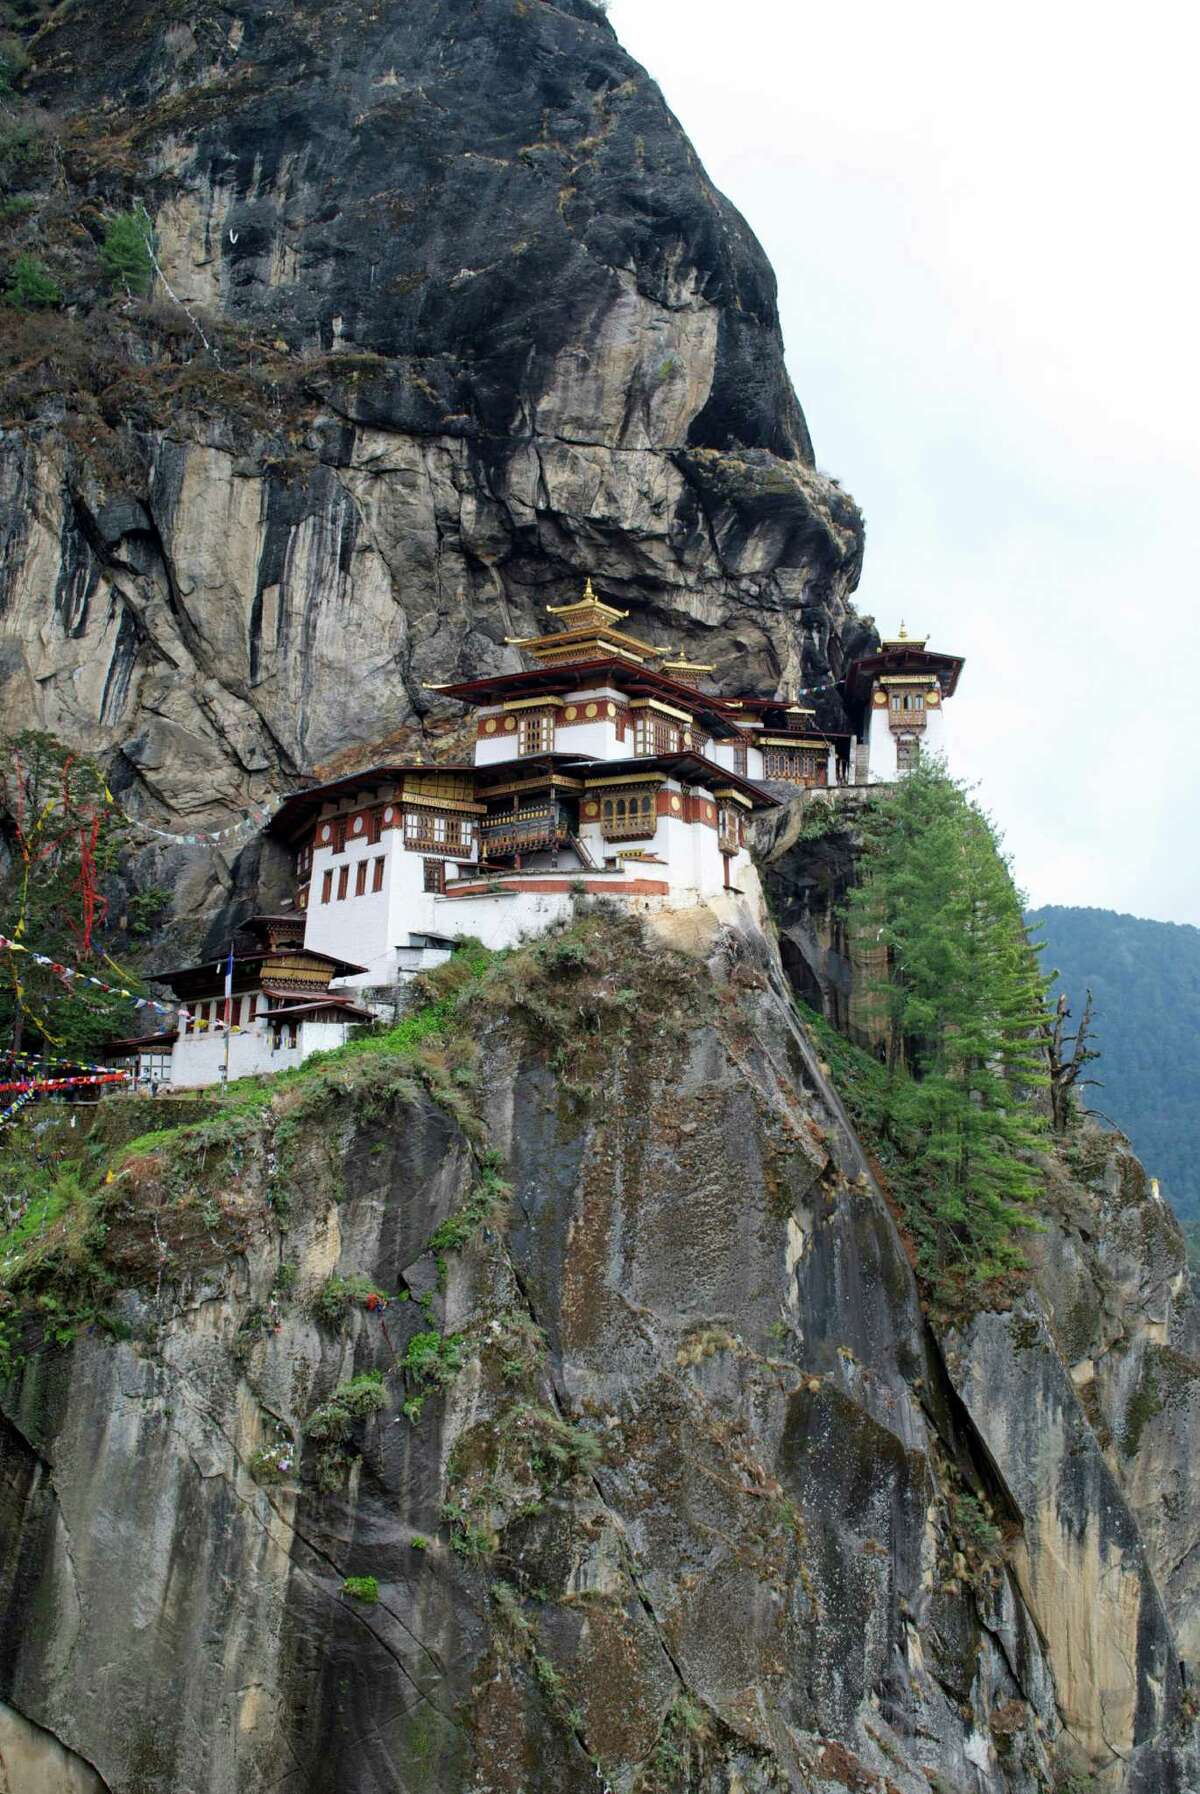 BHUTAN ﻿A policy of wellbeing over wealth creates a perfect balance of tourism and spirituality in this remote, mountainous country.